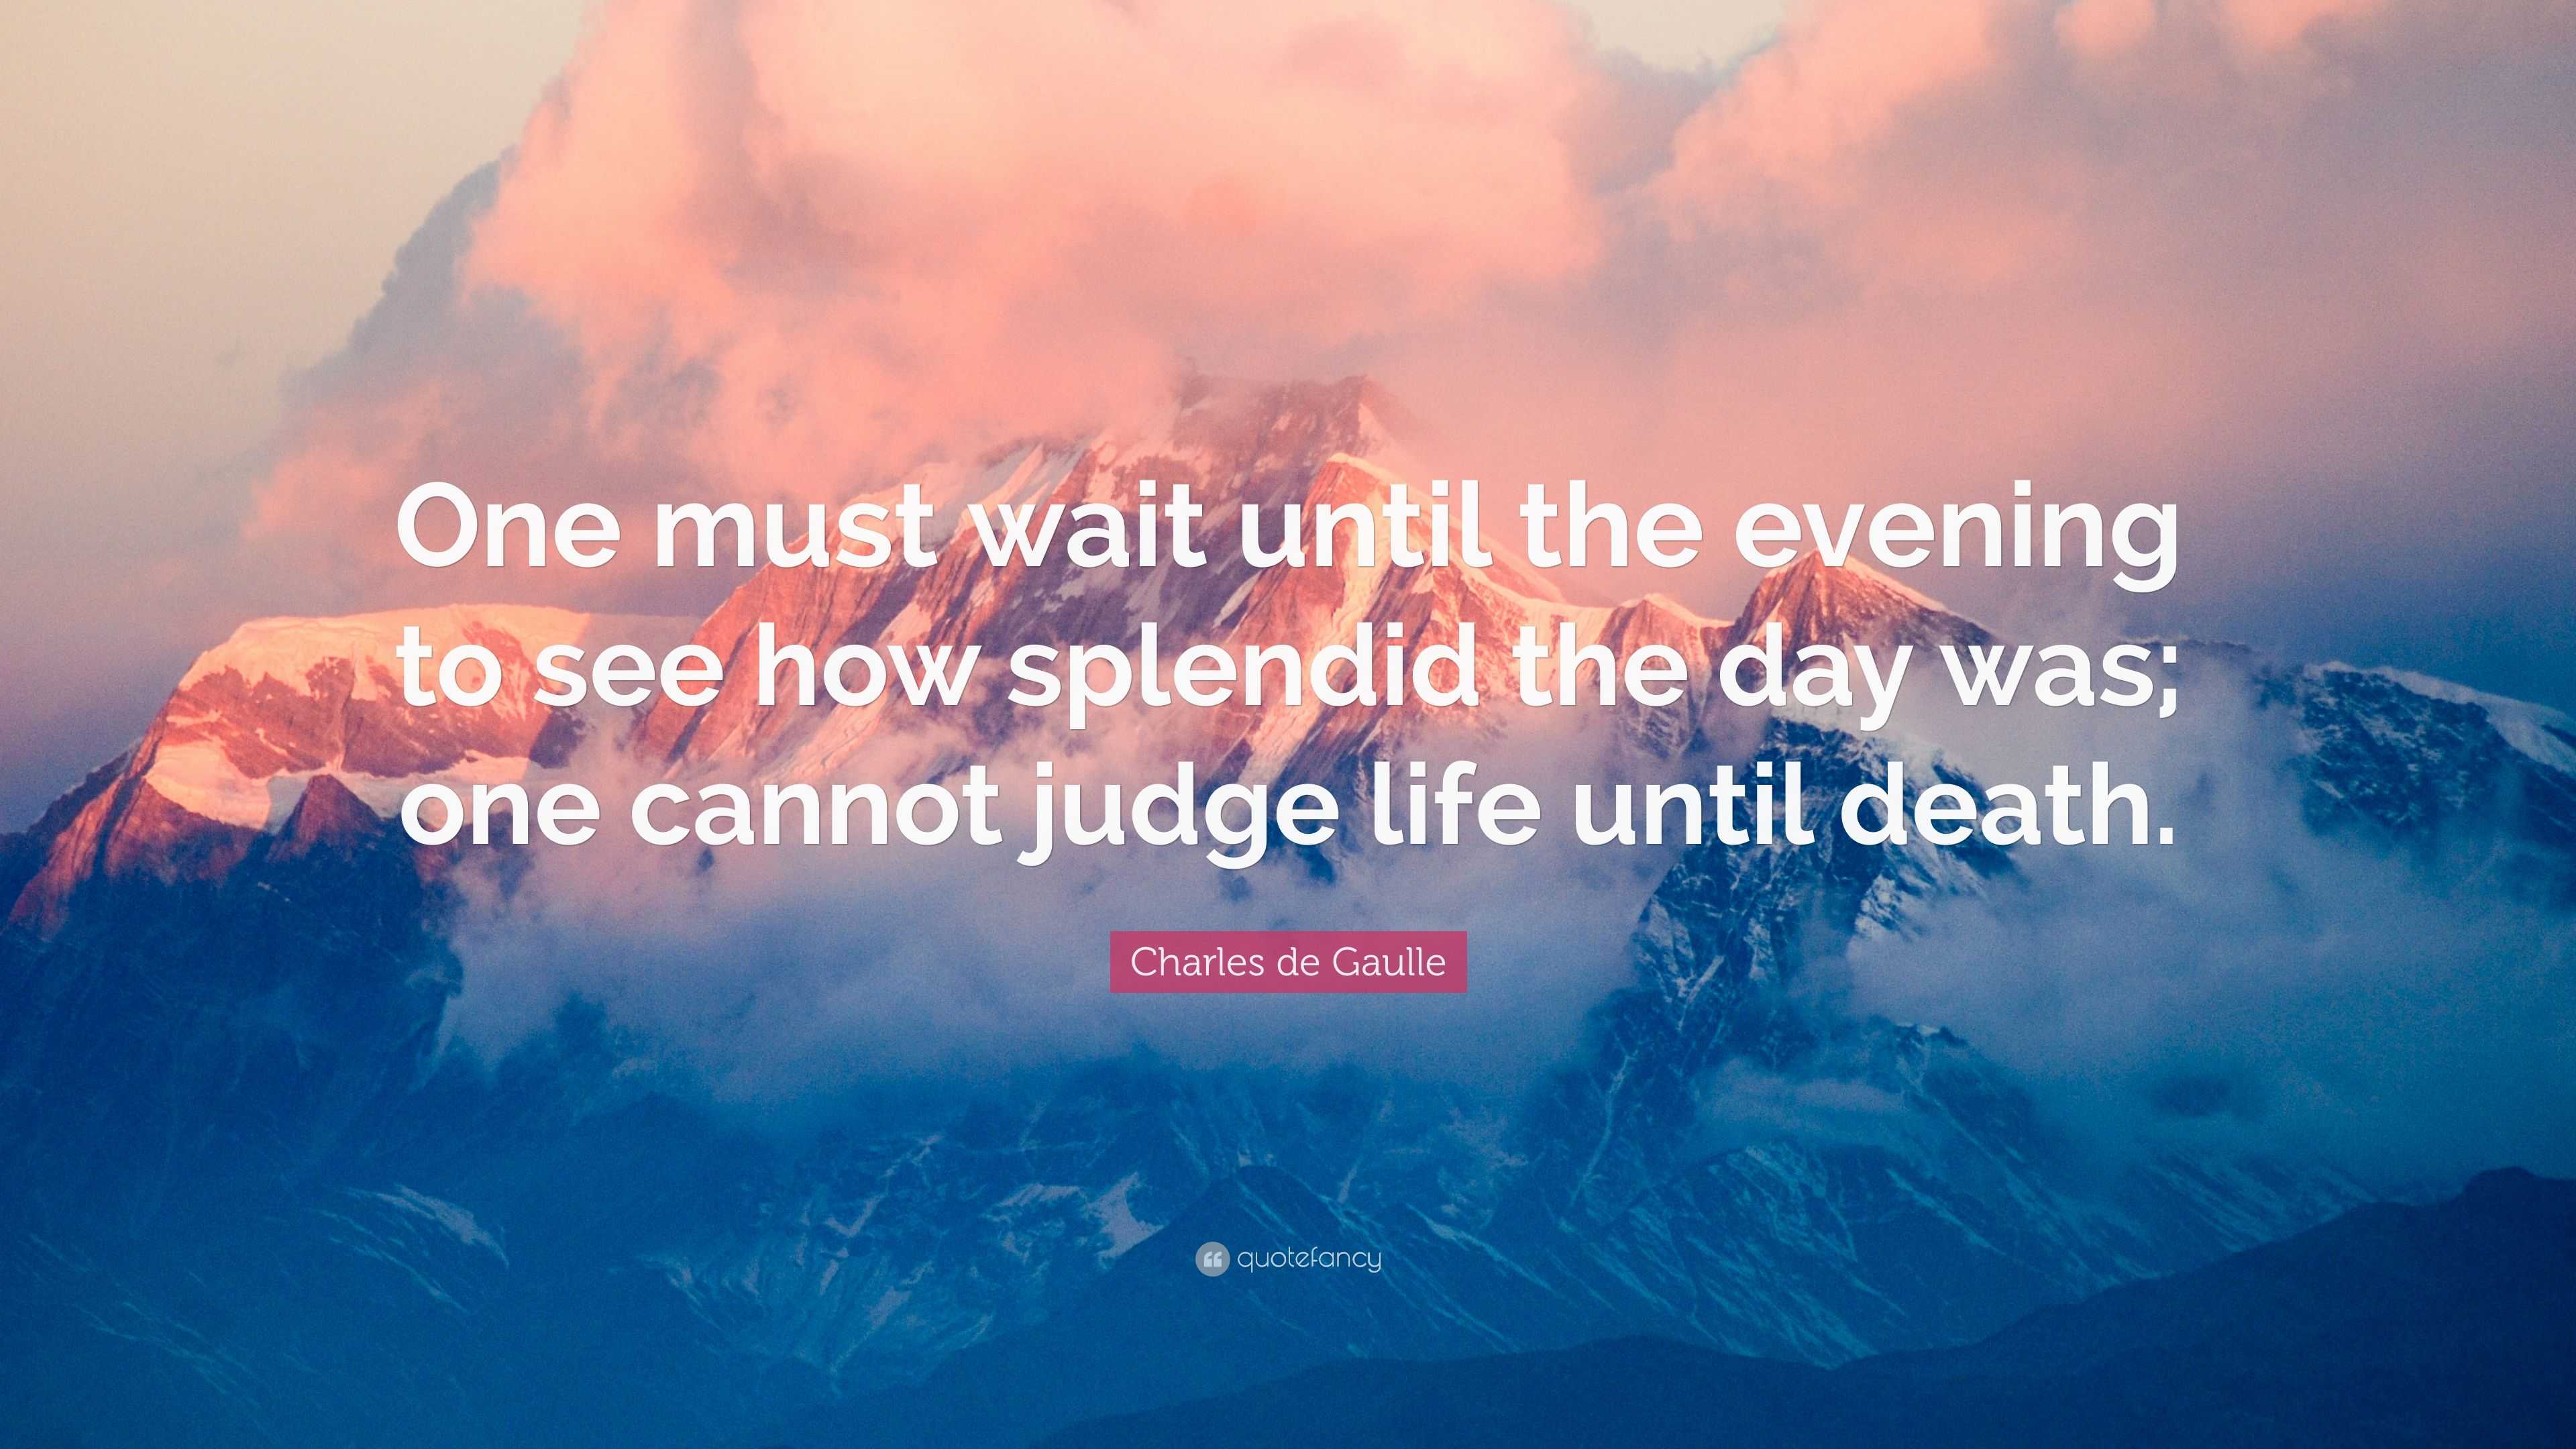 Charles de Gaulle Quote: “One must wait until the evening to see how ...